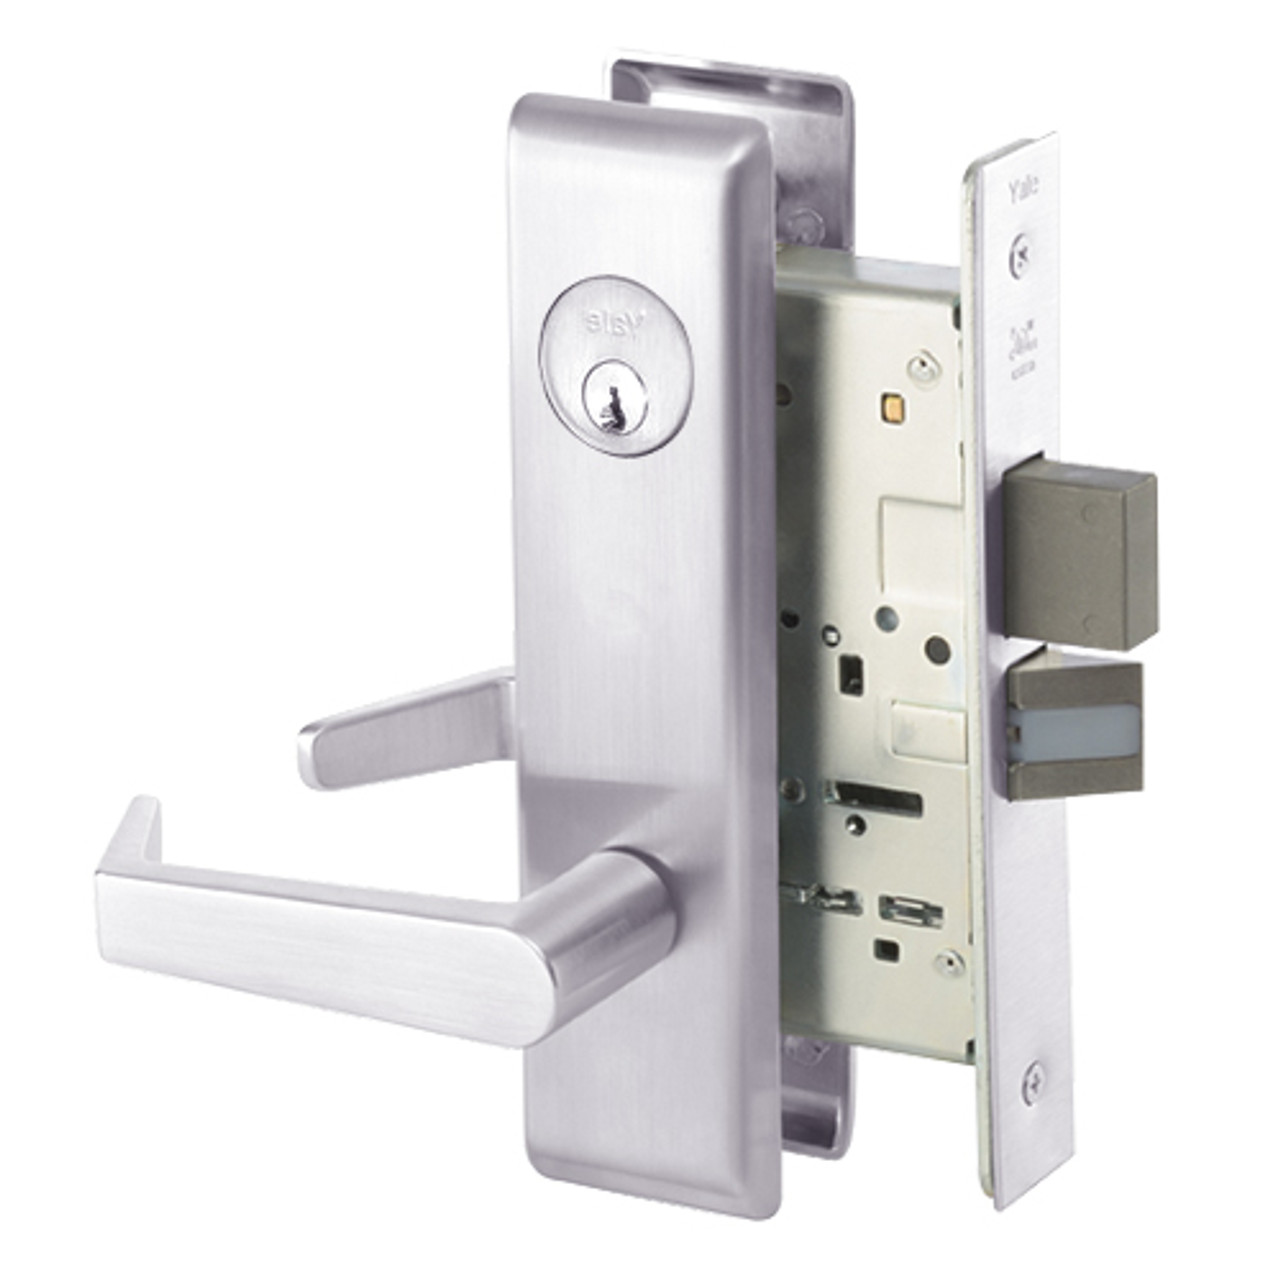 AUCN8822FL-629 Yale 8800FL Series Single Cylinder with Deadbolt Mortise Bathroom Lock with Indicator with Augusta Lever in Bright Stainless Steel